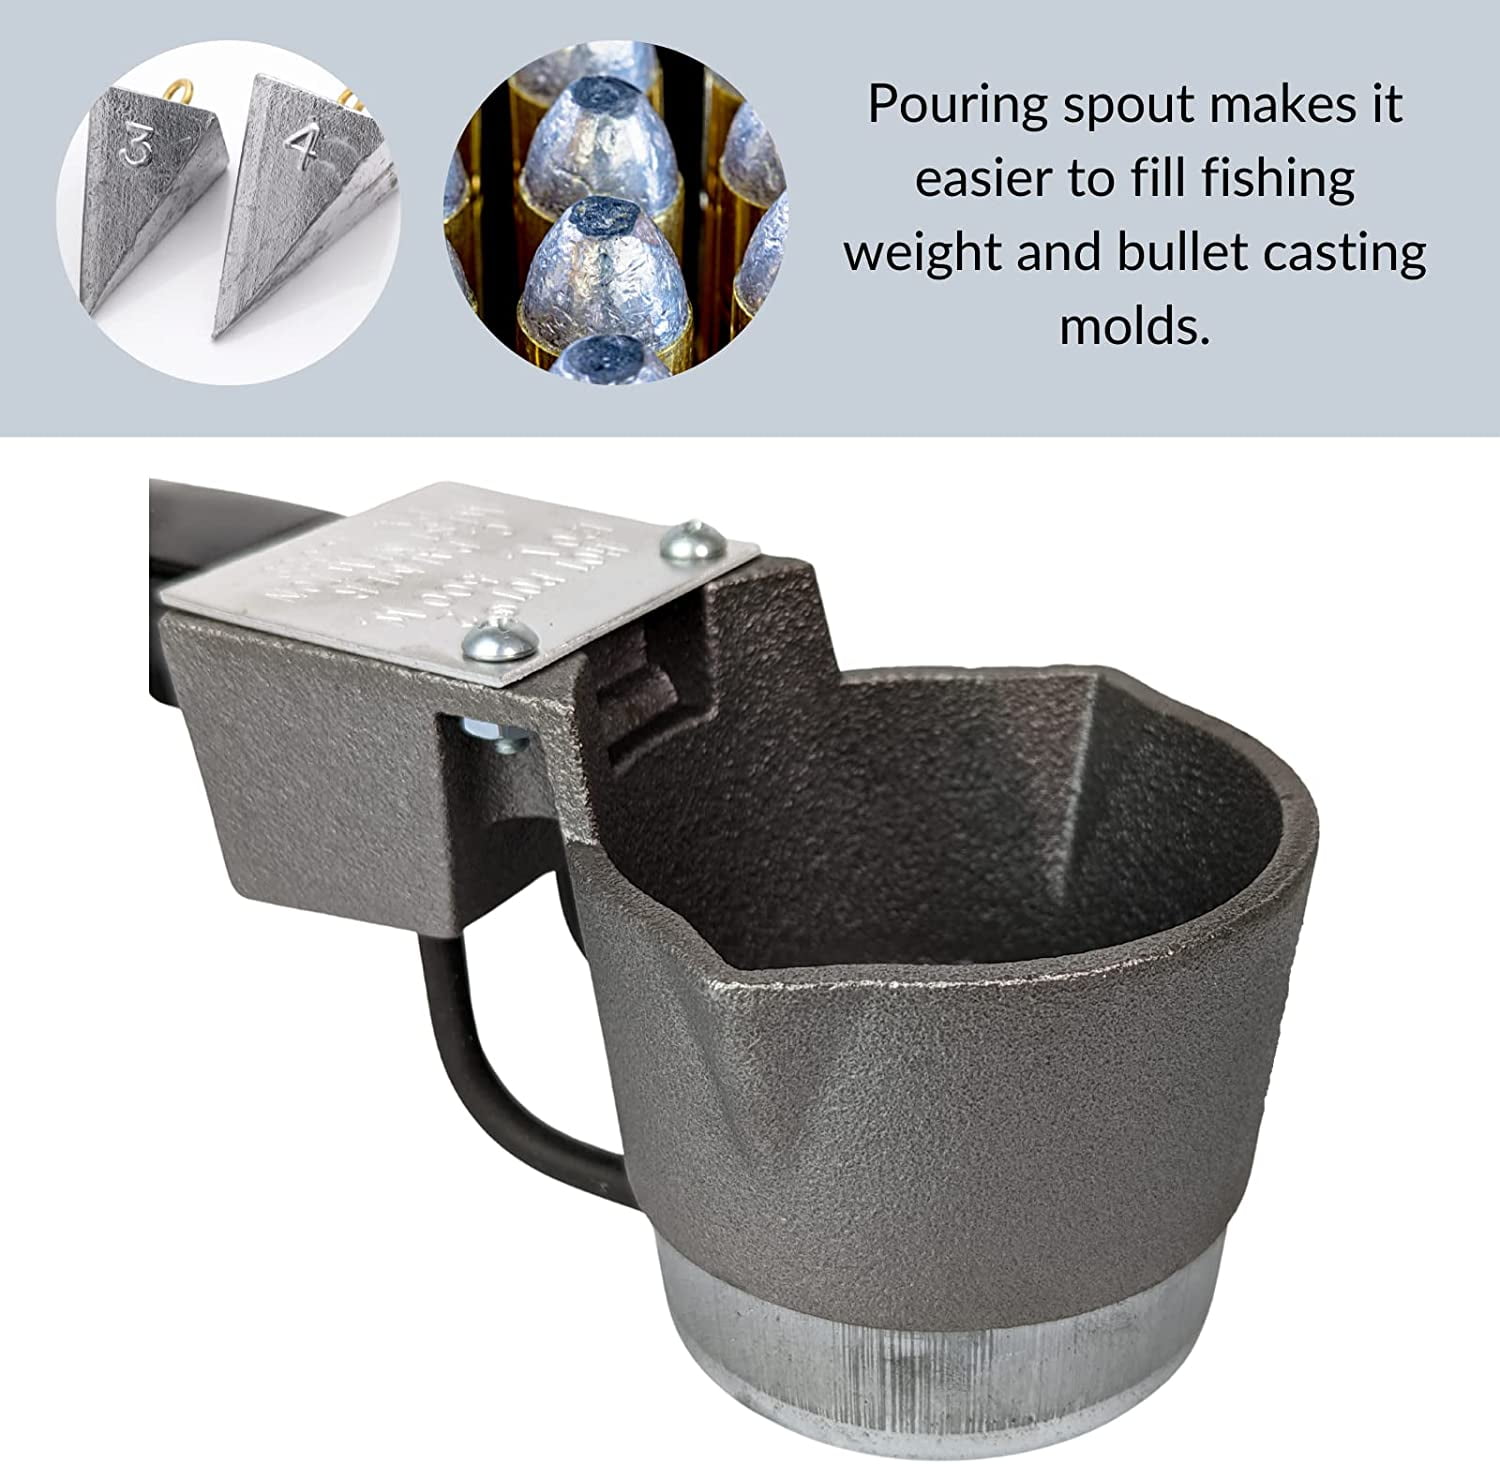 Do-It Hot Pot 2, Melts Lead Ingots Quickly, Electric Melting Pot for Lead, 4 Pound Capacity, Lead Melting Pot for Fishing Weight Molds & Bullet  Casting Molds